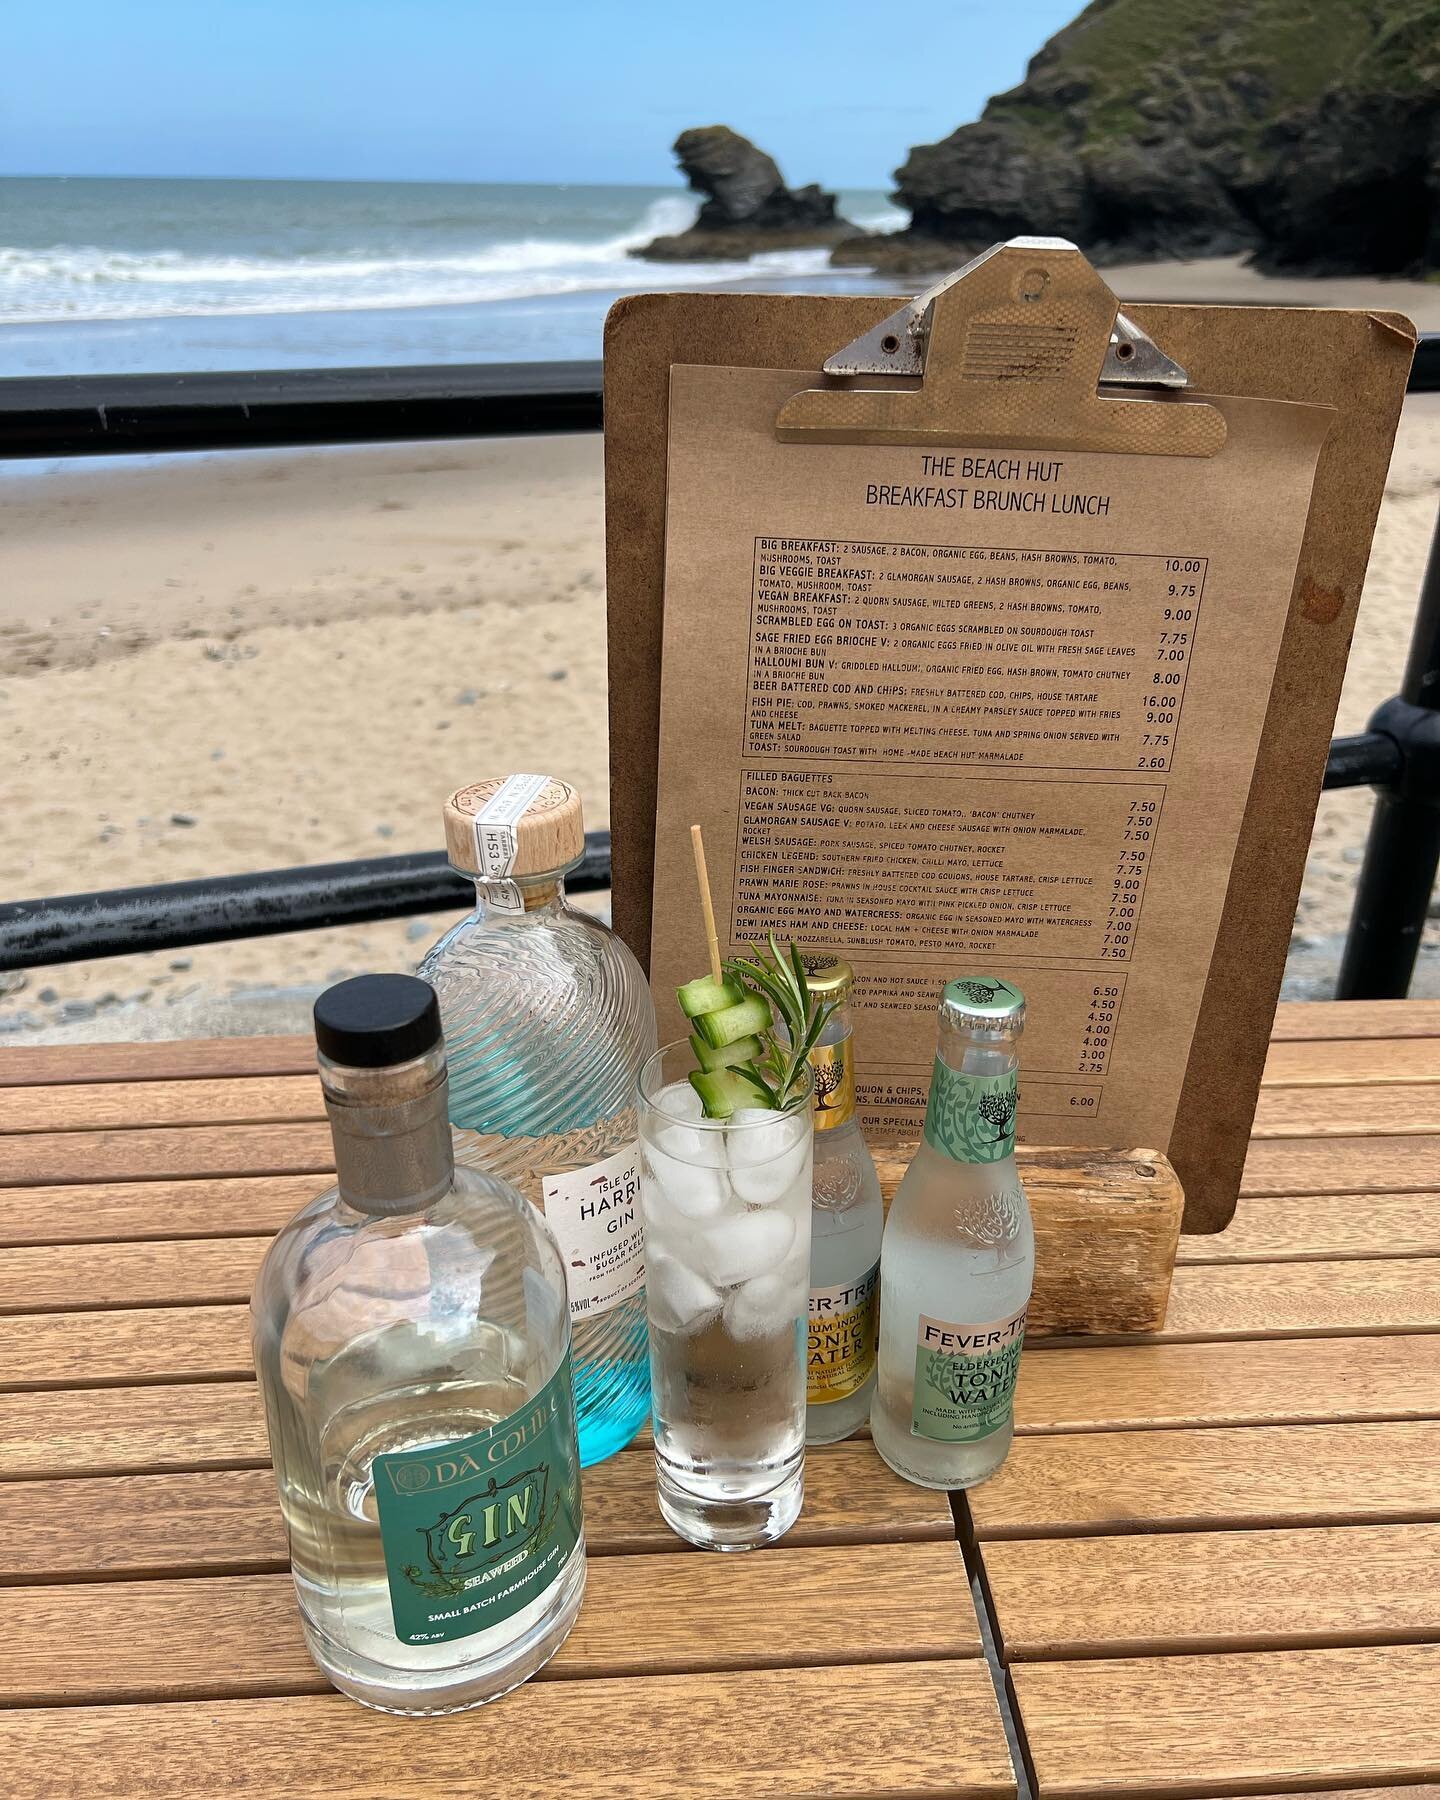 World Gin Day! @damhiledistillery @isleofharrisdistillers seaweed gin perfect with fish &amp; chips at the beach! #llangrannog #fishandchips #beachcafe #walescoastpath #shoplocal #foodie